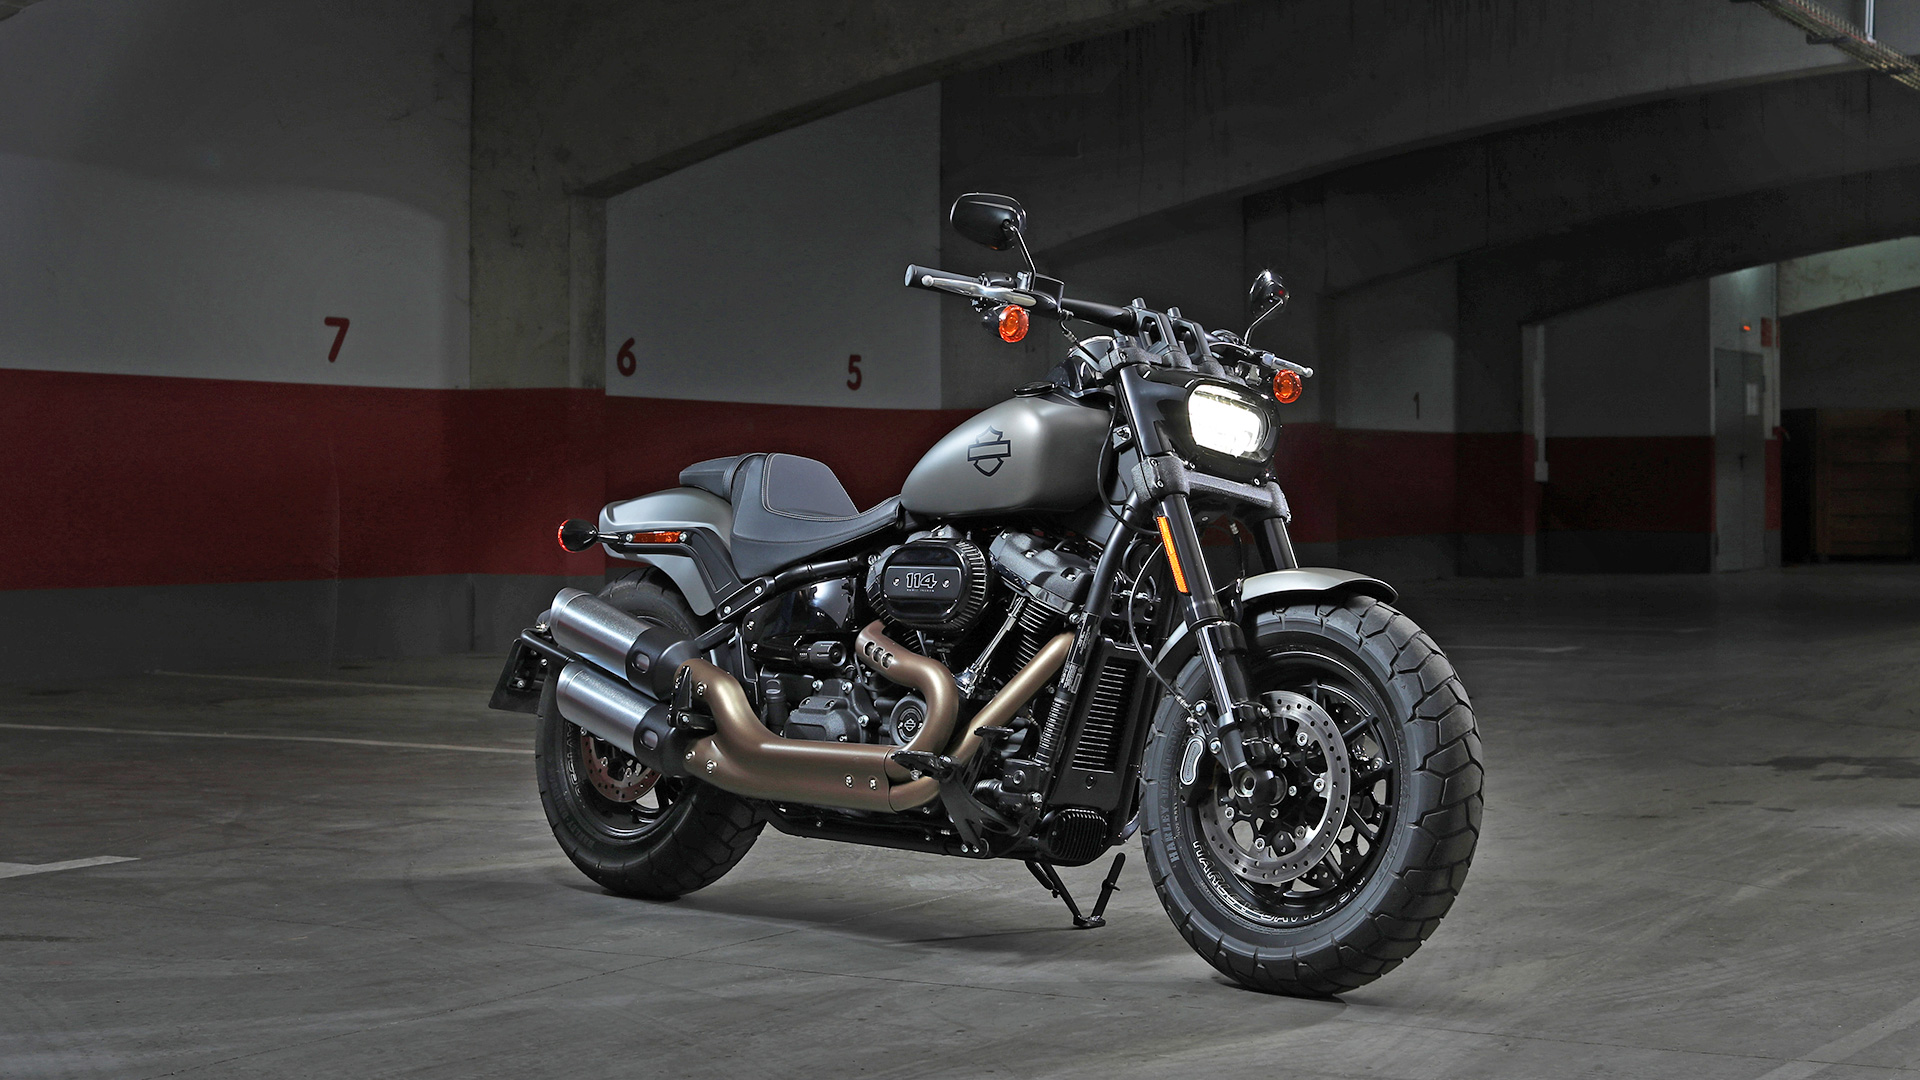 Harley Davidson Street Bob Standard Price In India Specifications And Features Street Bob Standard Autoportal Com